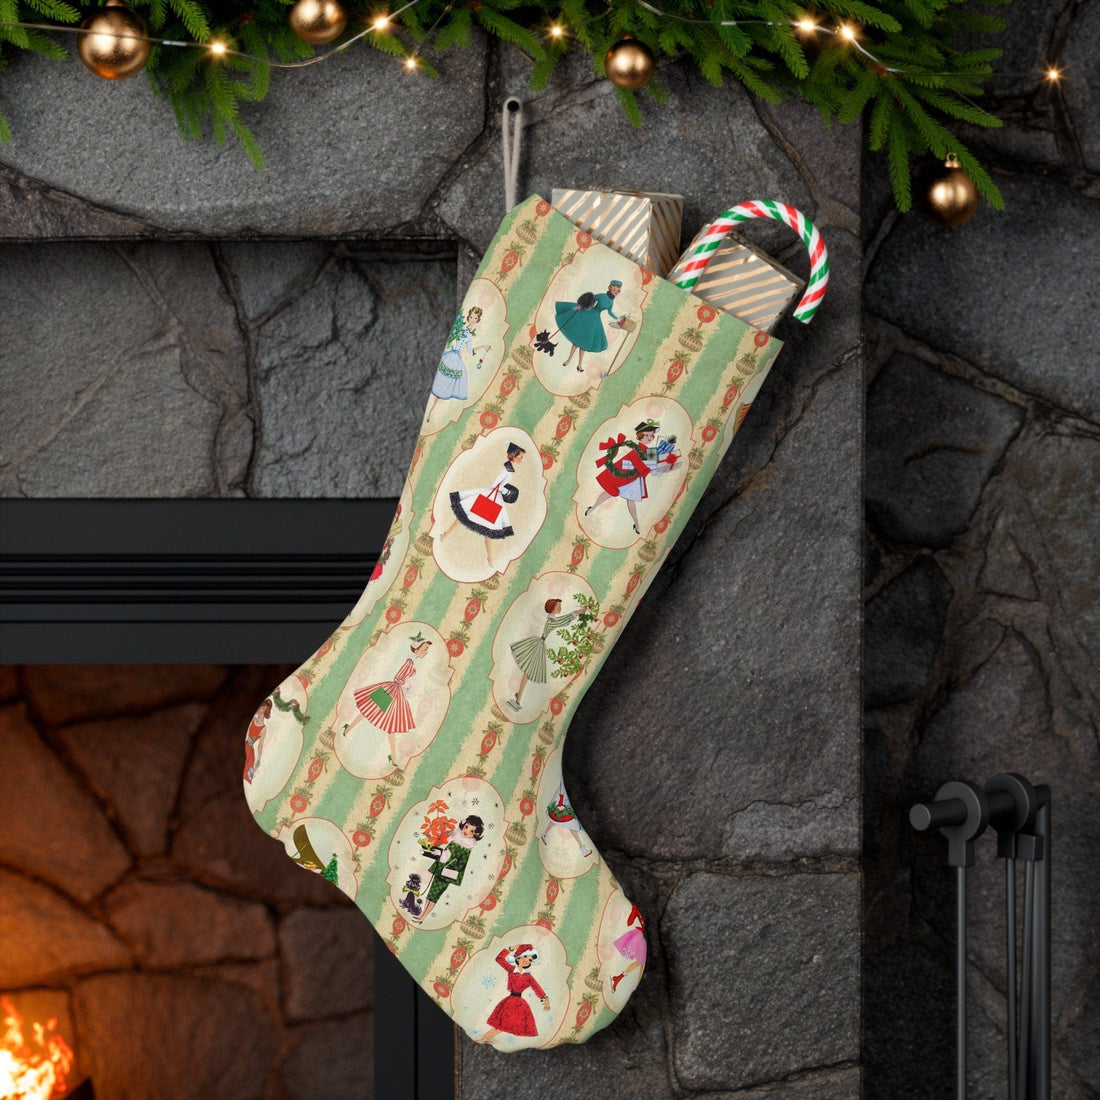 Kate McEnroe New York Vintage 1950s Christmas Stockings, Mid Century Modern Retro Green, Red, Women, Housewives in Christmas Setting Holiday Decor - KM13579723Holiday Stockings11012746711415640049